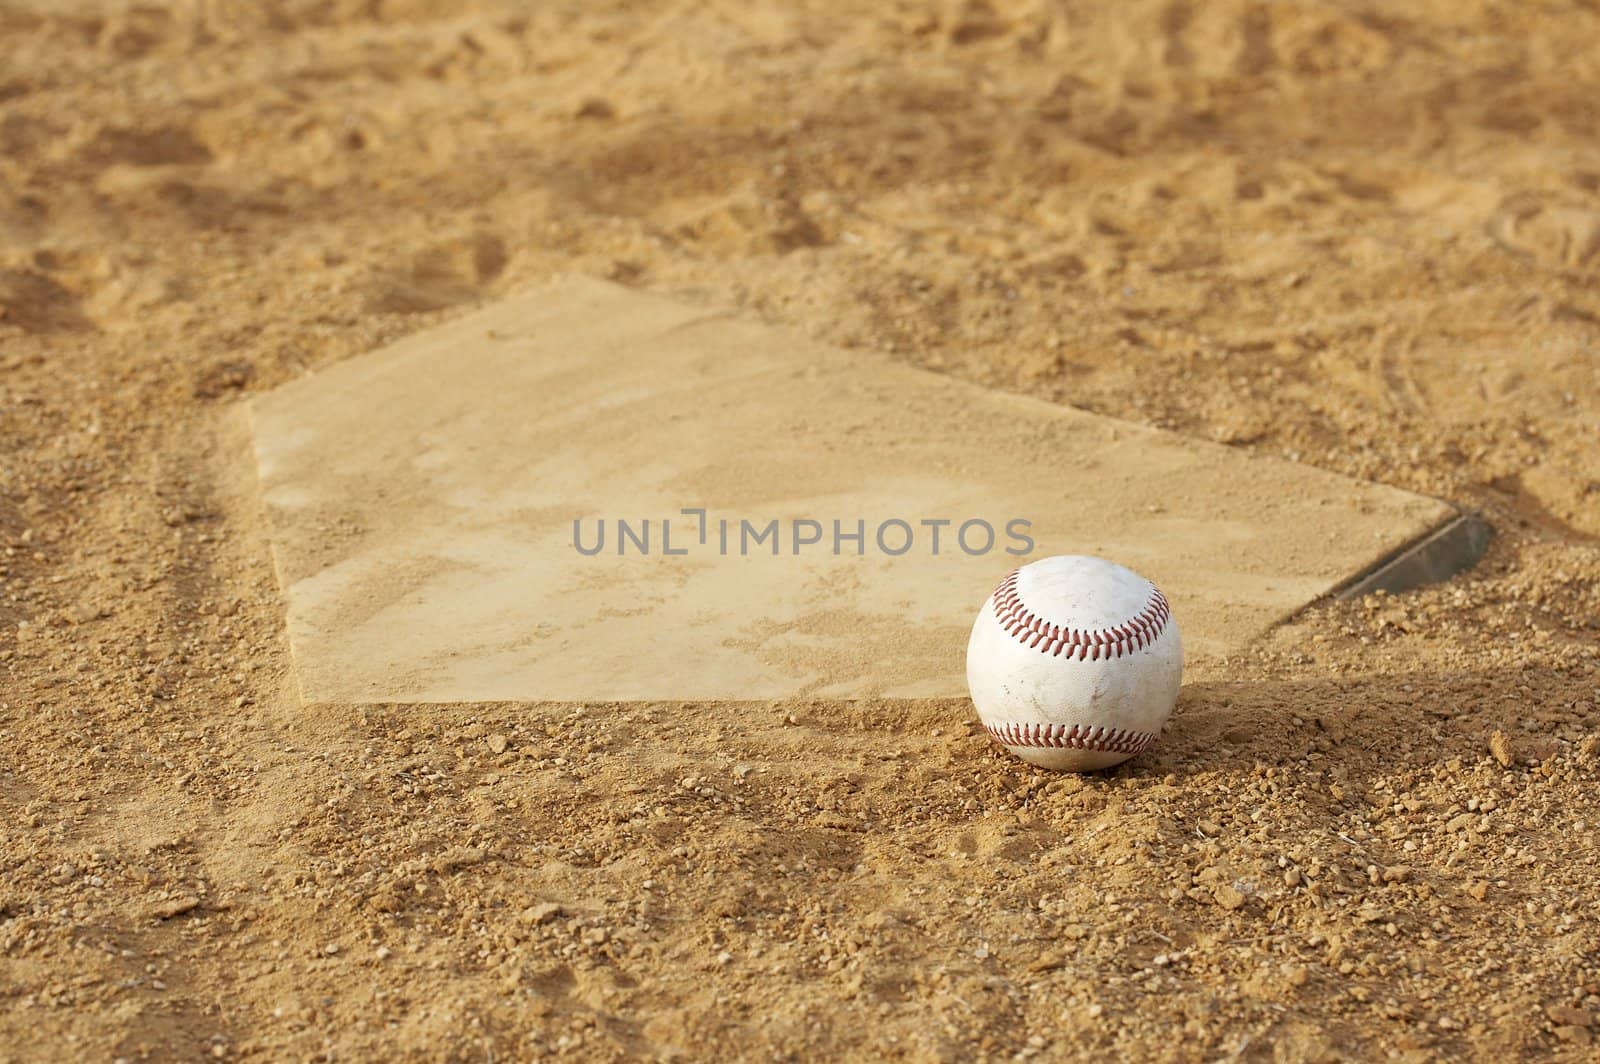 one baseball on home plate at a sports field